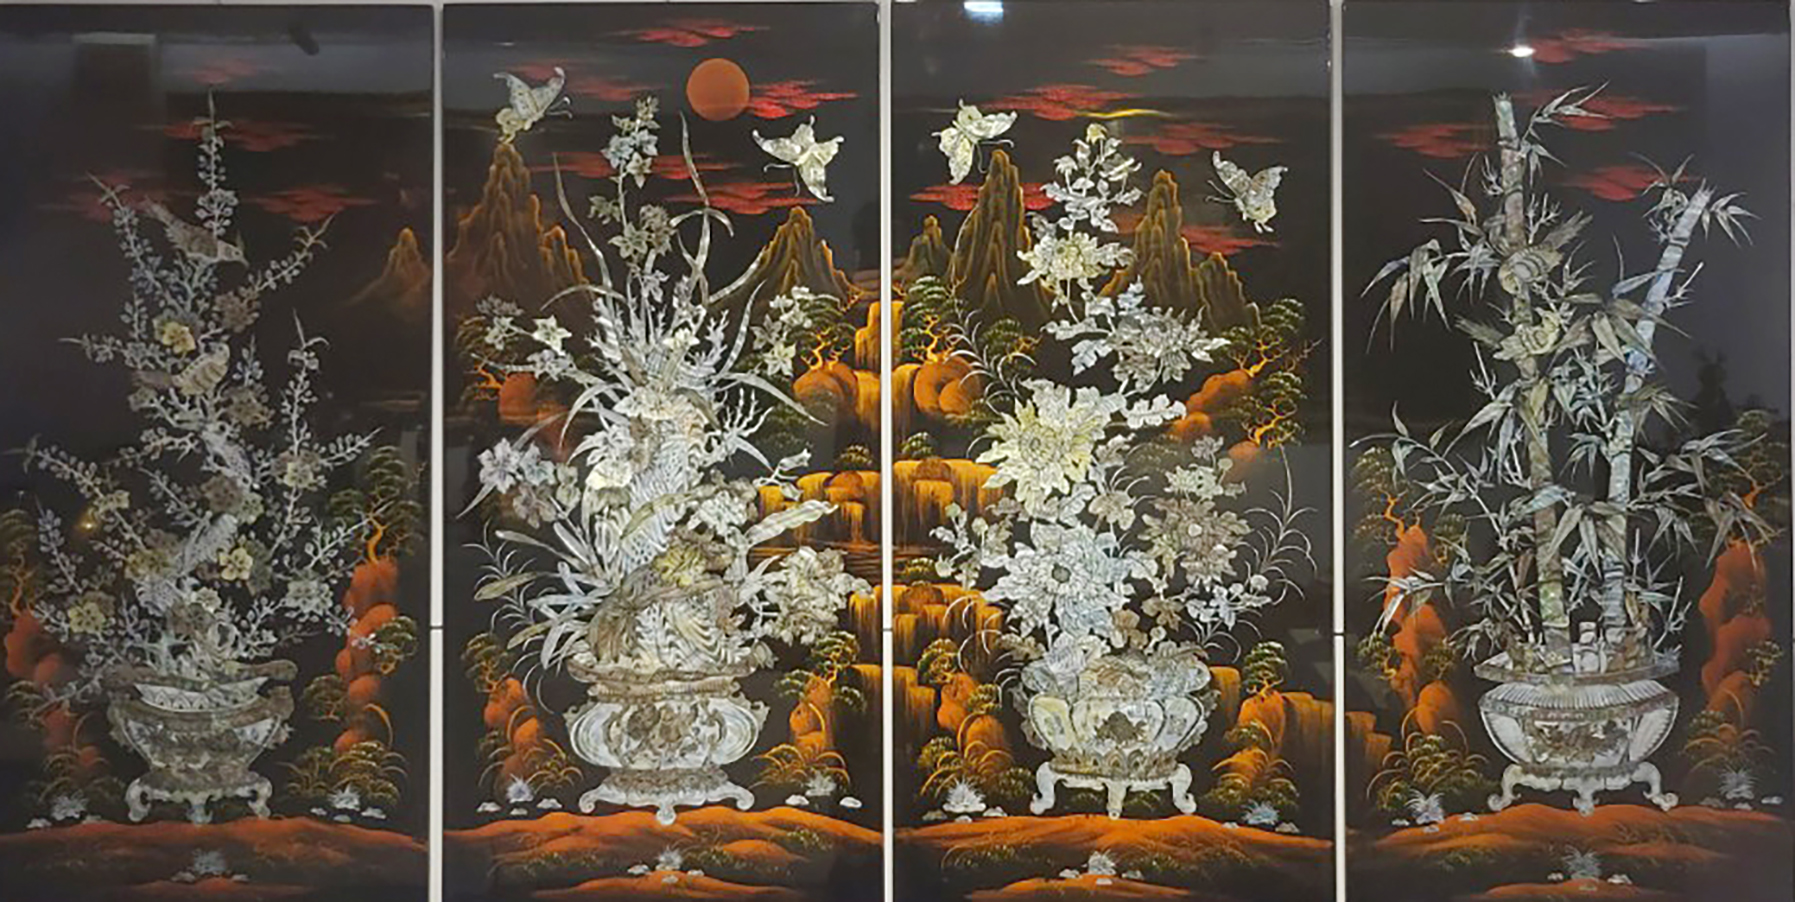 The 'Mai, Lan, Cuc, Truc' (Apricot Blossom, Orchid, Chrysanthemum, Bamboo) work by painter 